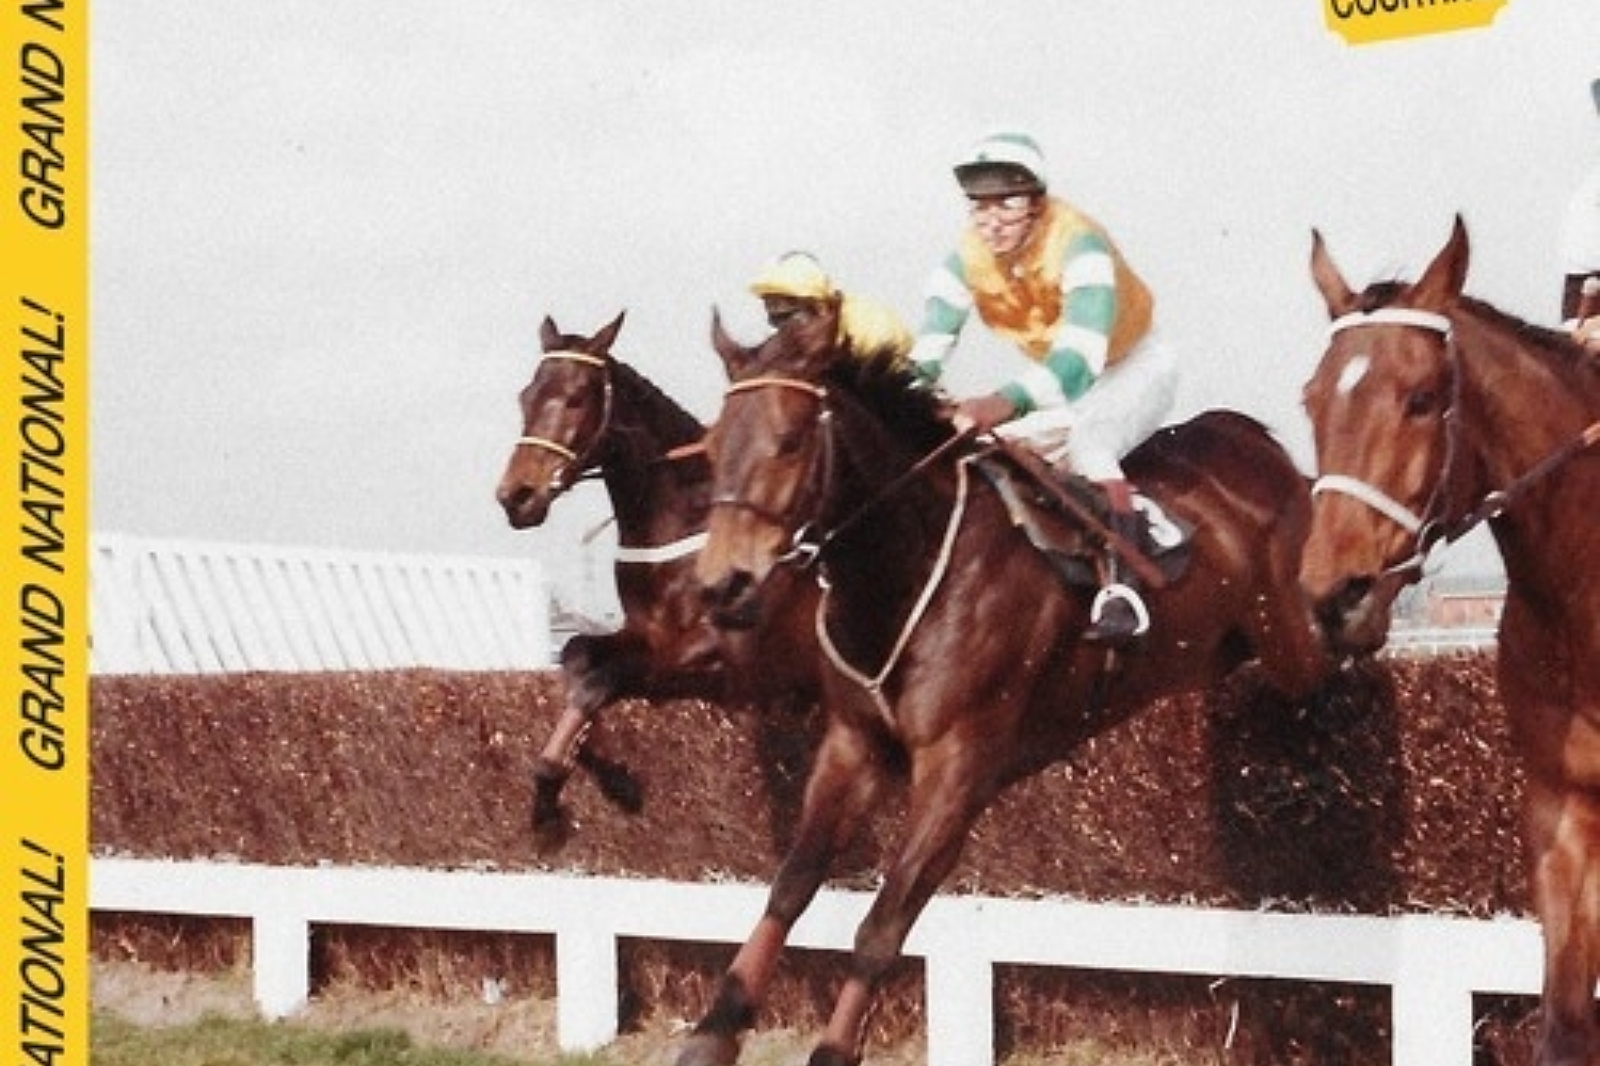 Courting - Grand National